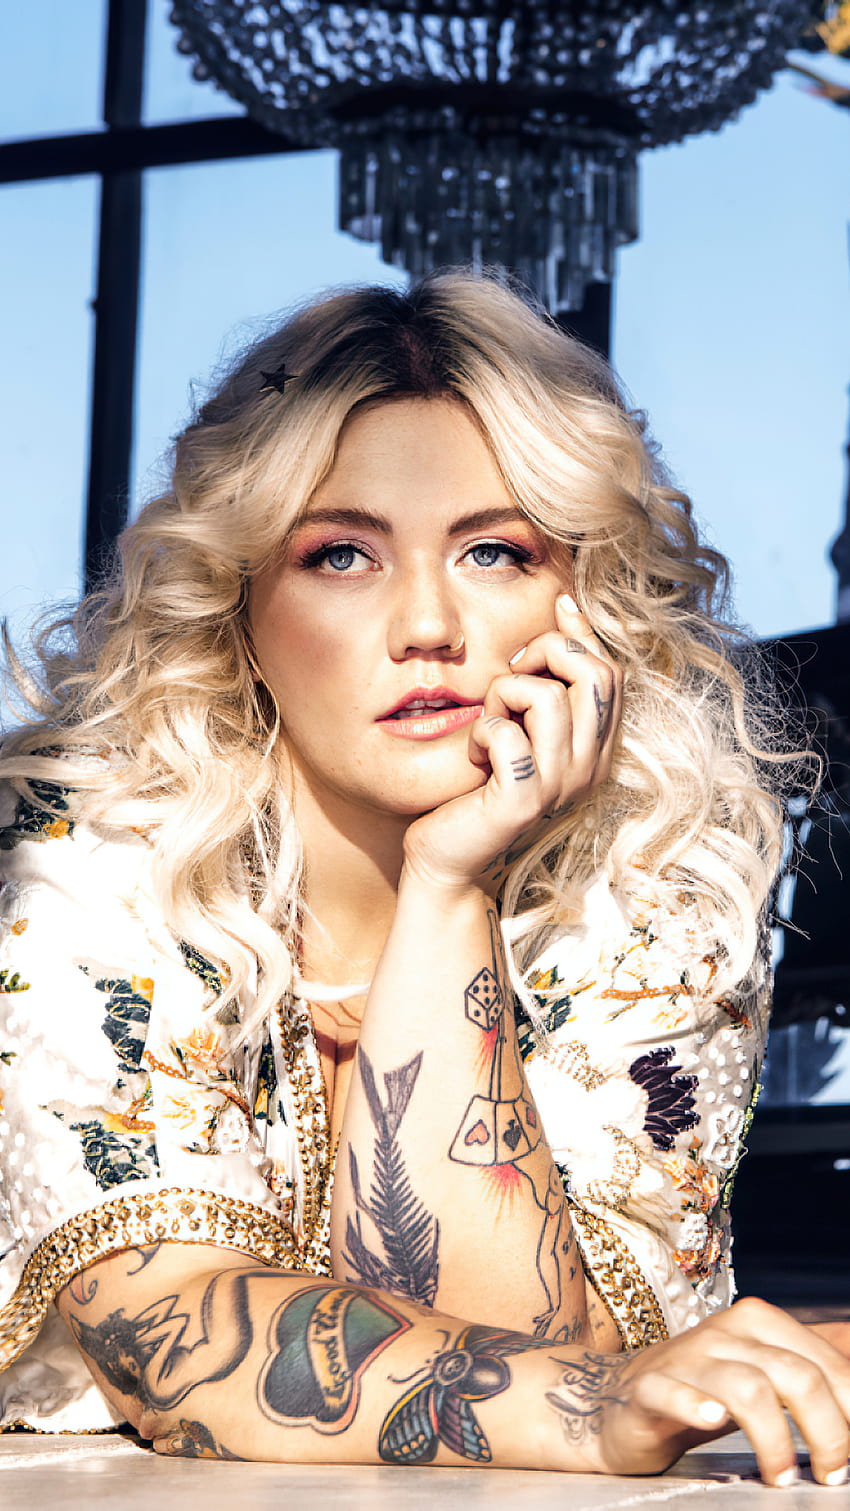 1080x1920 Elle King 2020 Iphone 7,6s,6 Plus, Pixel xl ,One Plus 3,3t,5 , Backgrounds, and HD phone wallpaper